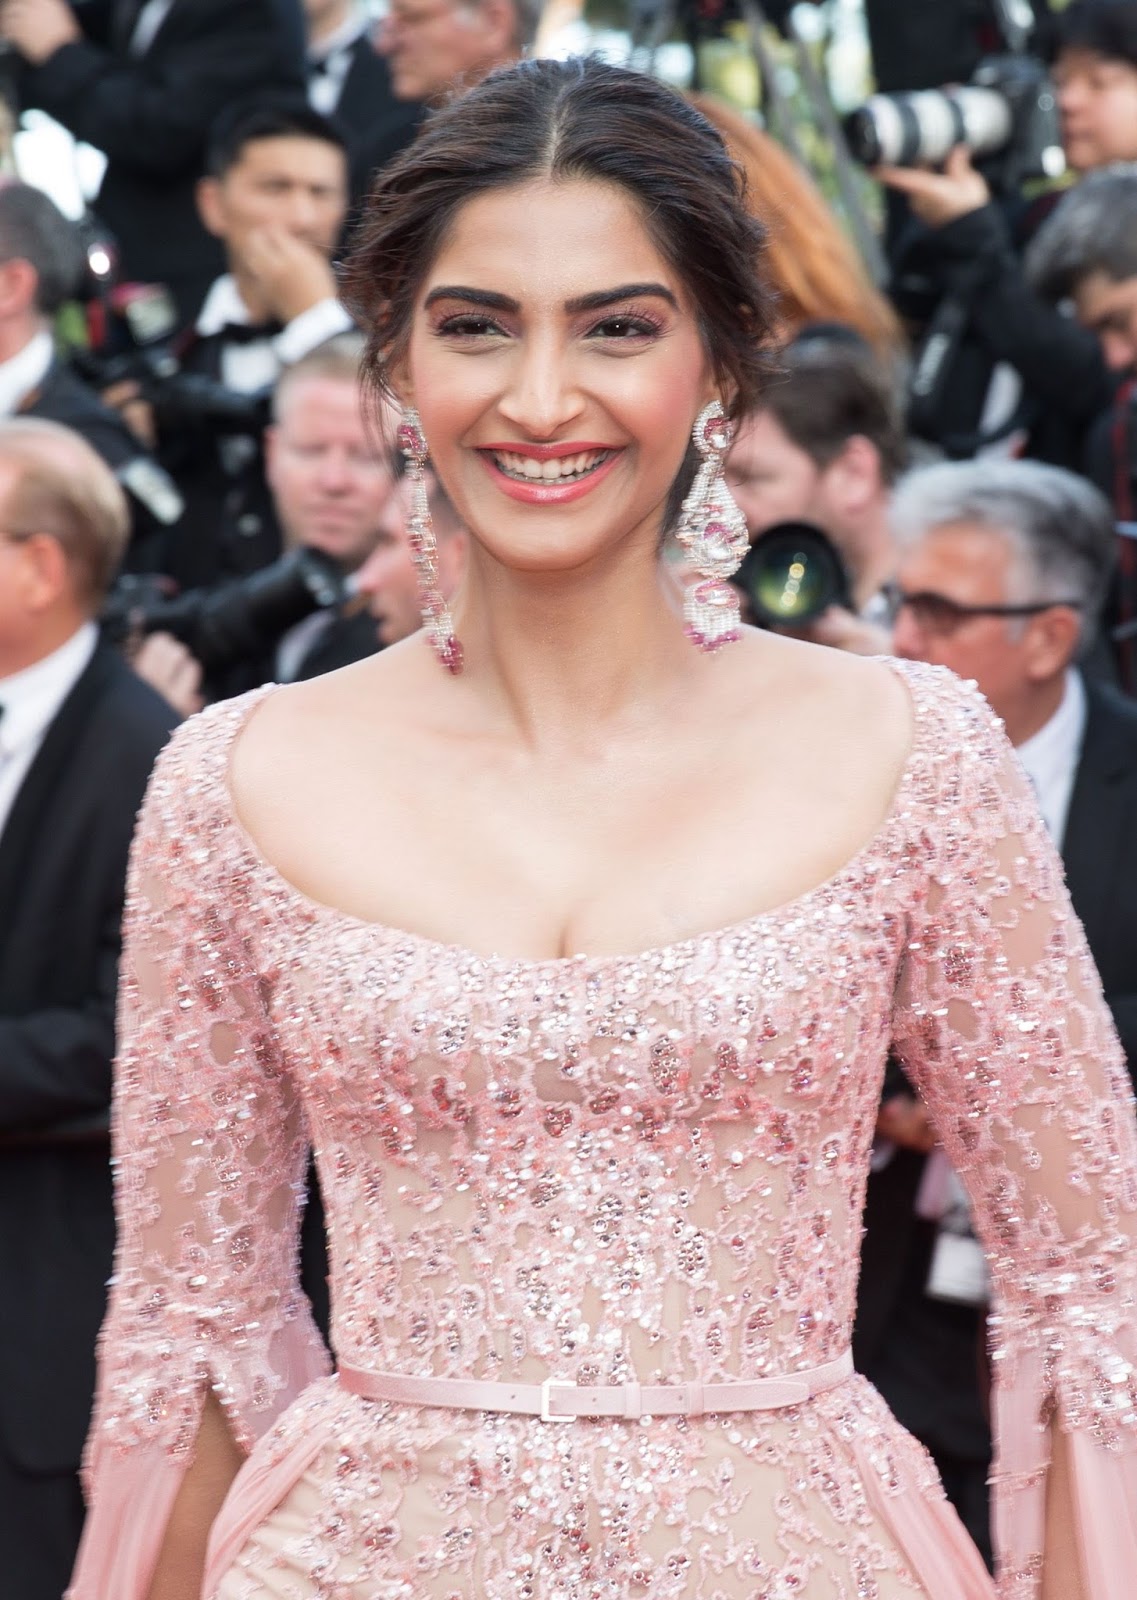 Sonam Kapoor Looks Flawless in Elie Saab Peach Gown At 'The Meyerowitz Stories' Premiere During The 70th Cannes Film Festival 2017